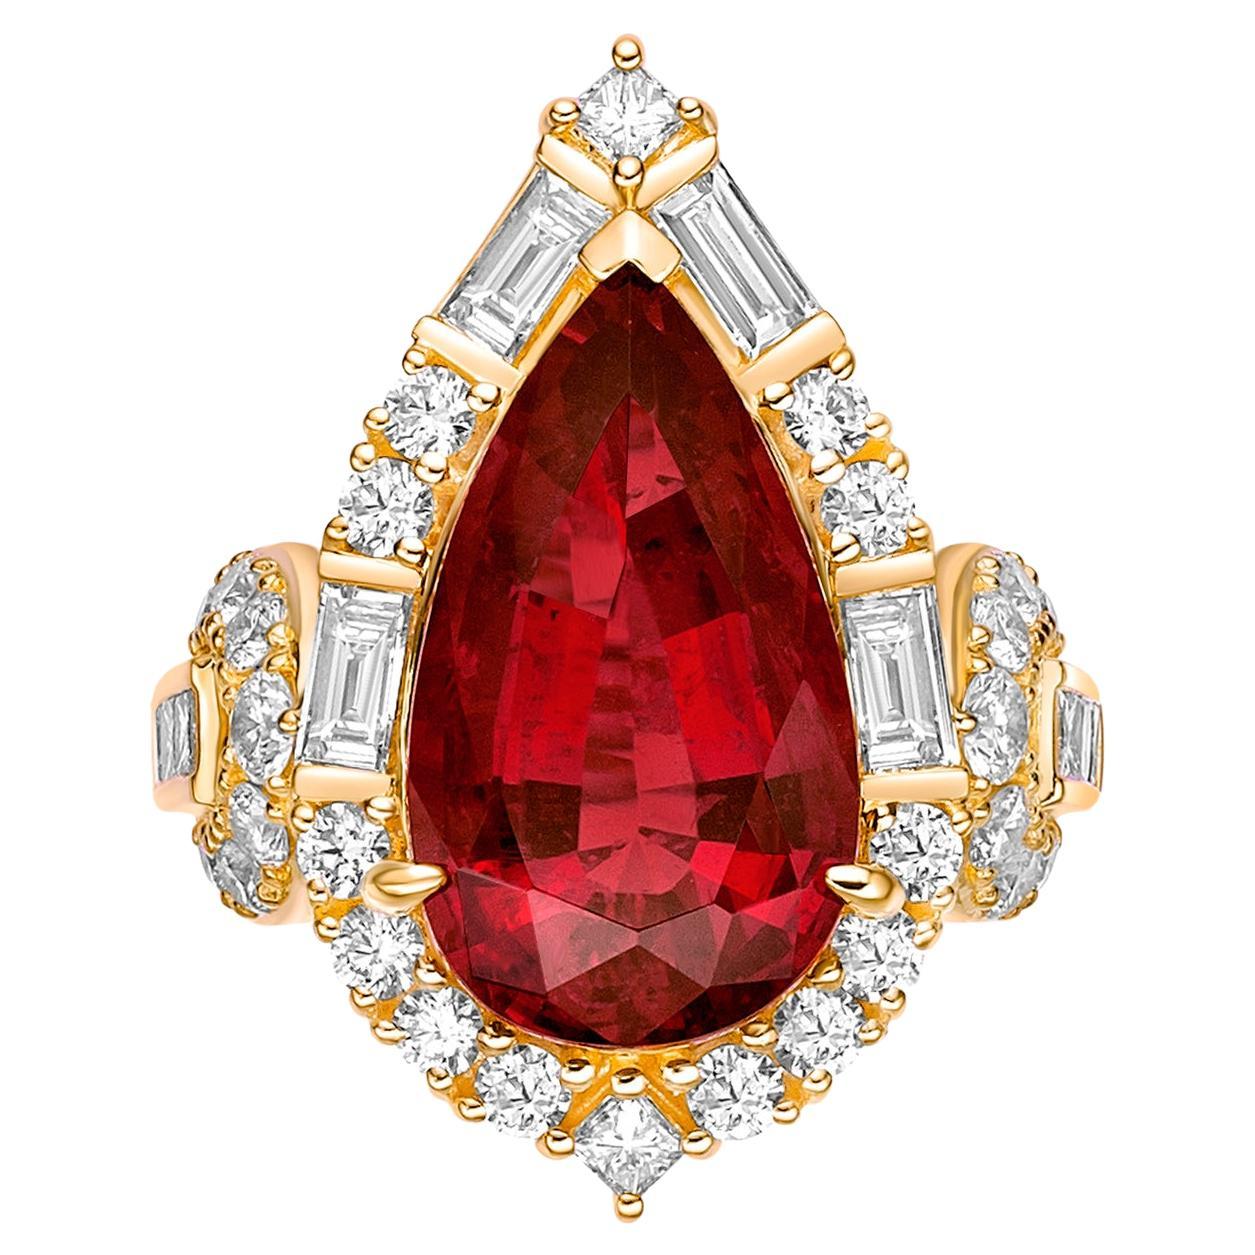 6.796 Carat Rubelite Fancy Ring in 18Karat Yellow Gold with White Diamond. For Sale